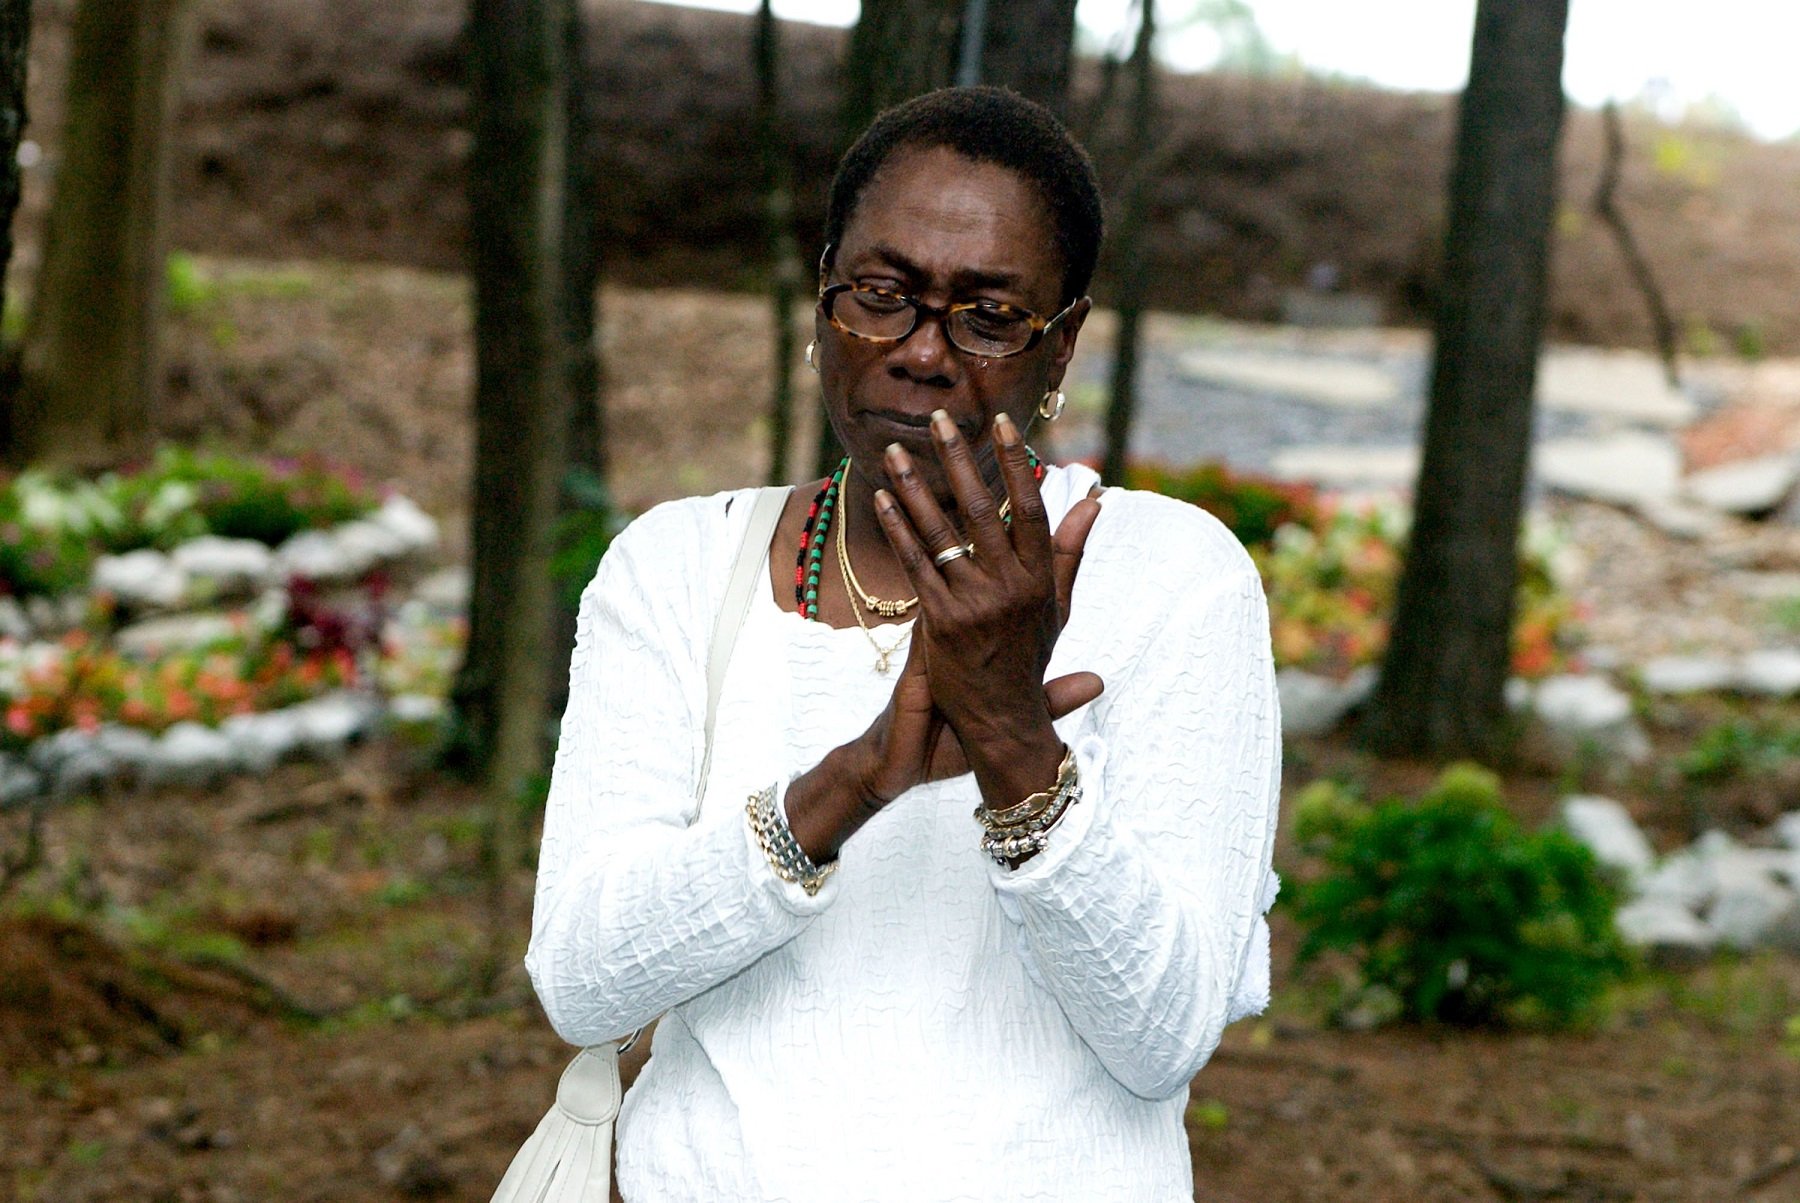 Afeni Shakur, dressed in all white